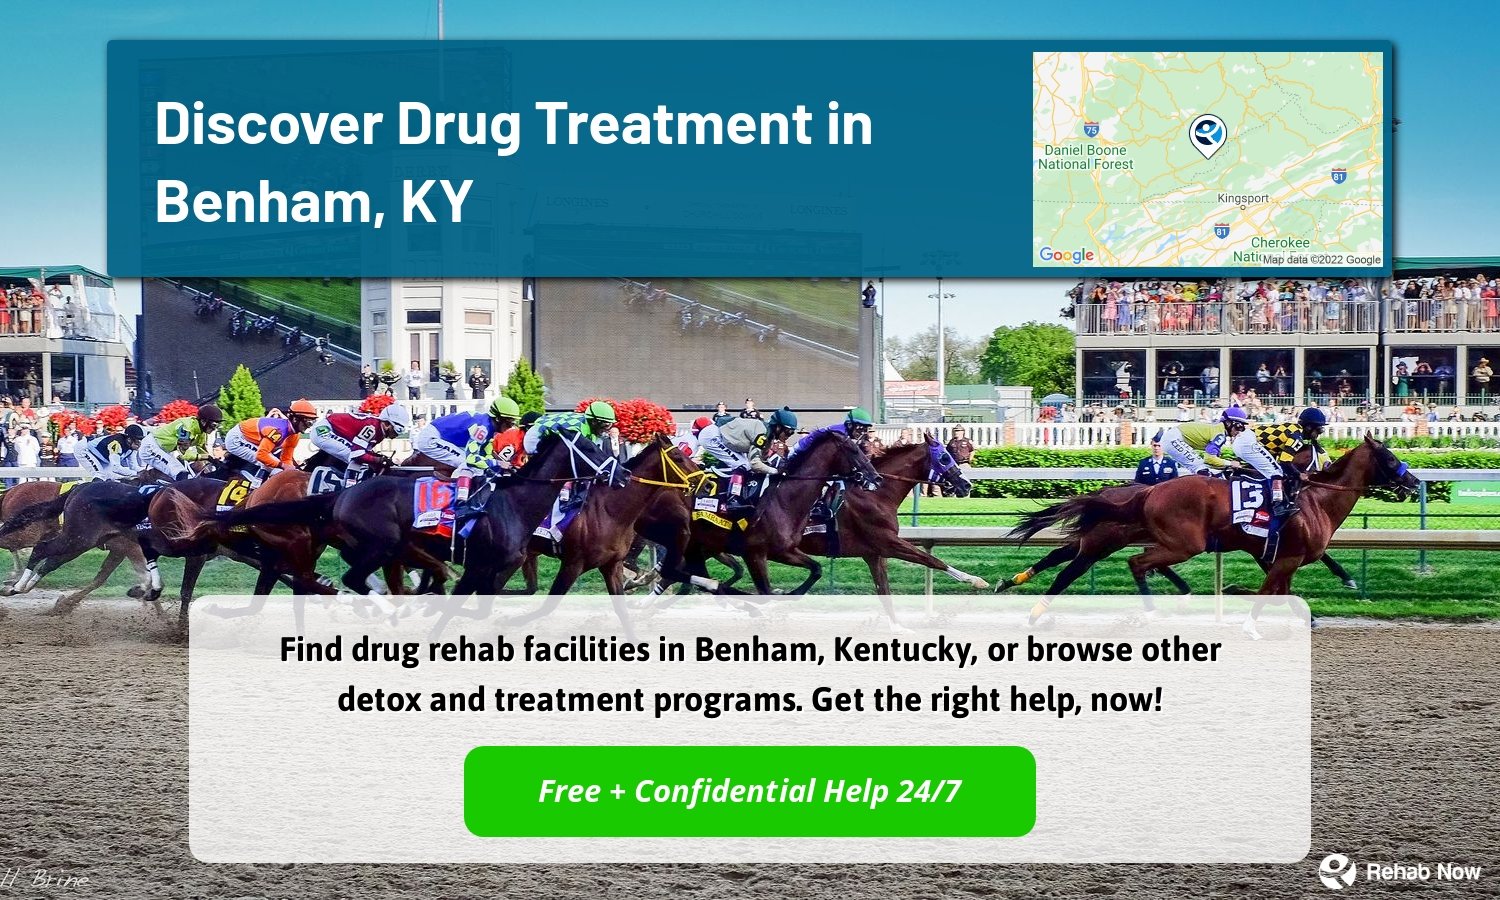 Find drug rehab facilities in Benham, Kentucky, or browse other detox and treatment programs. Get the right help, now!